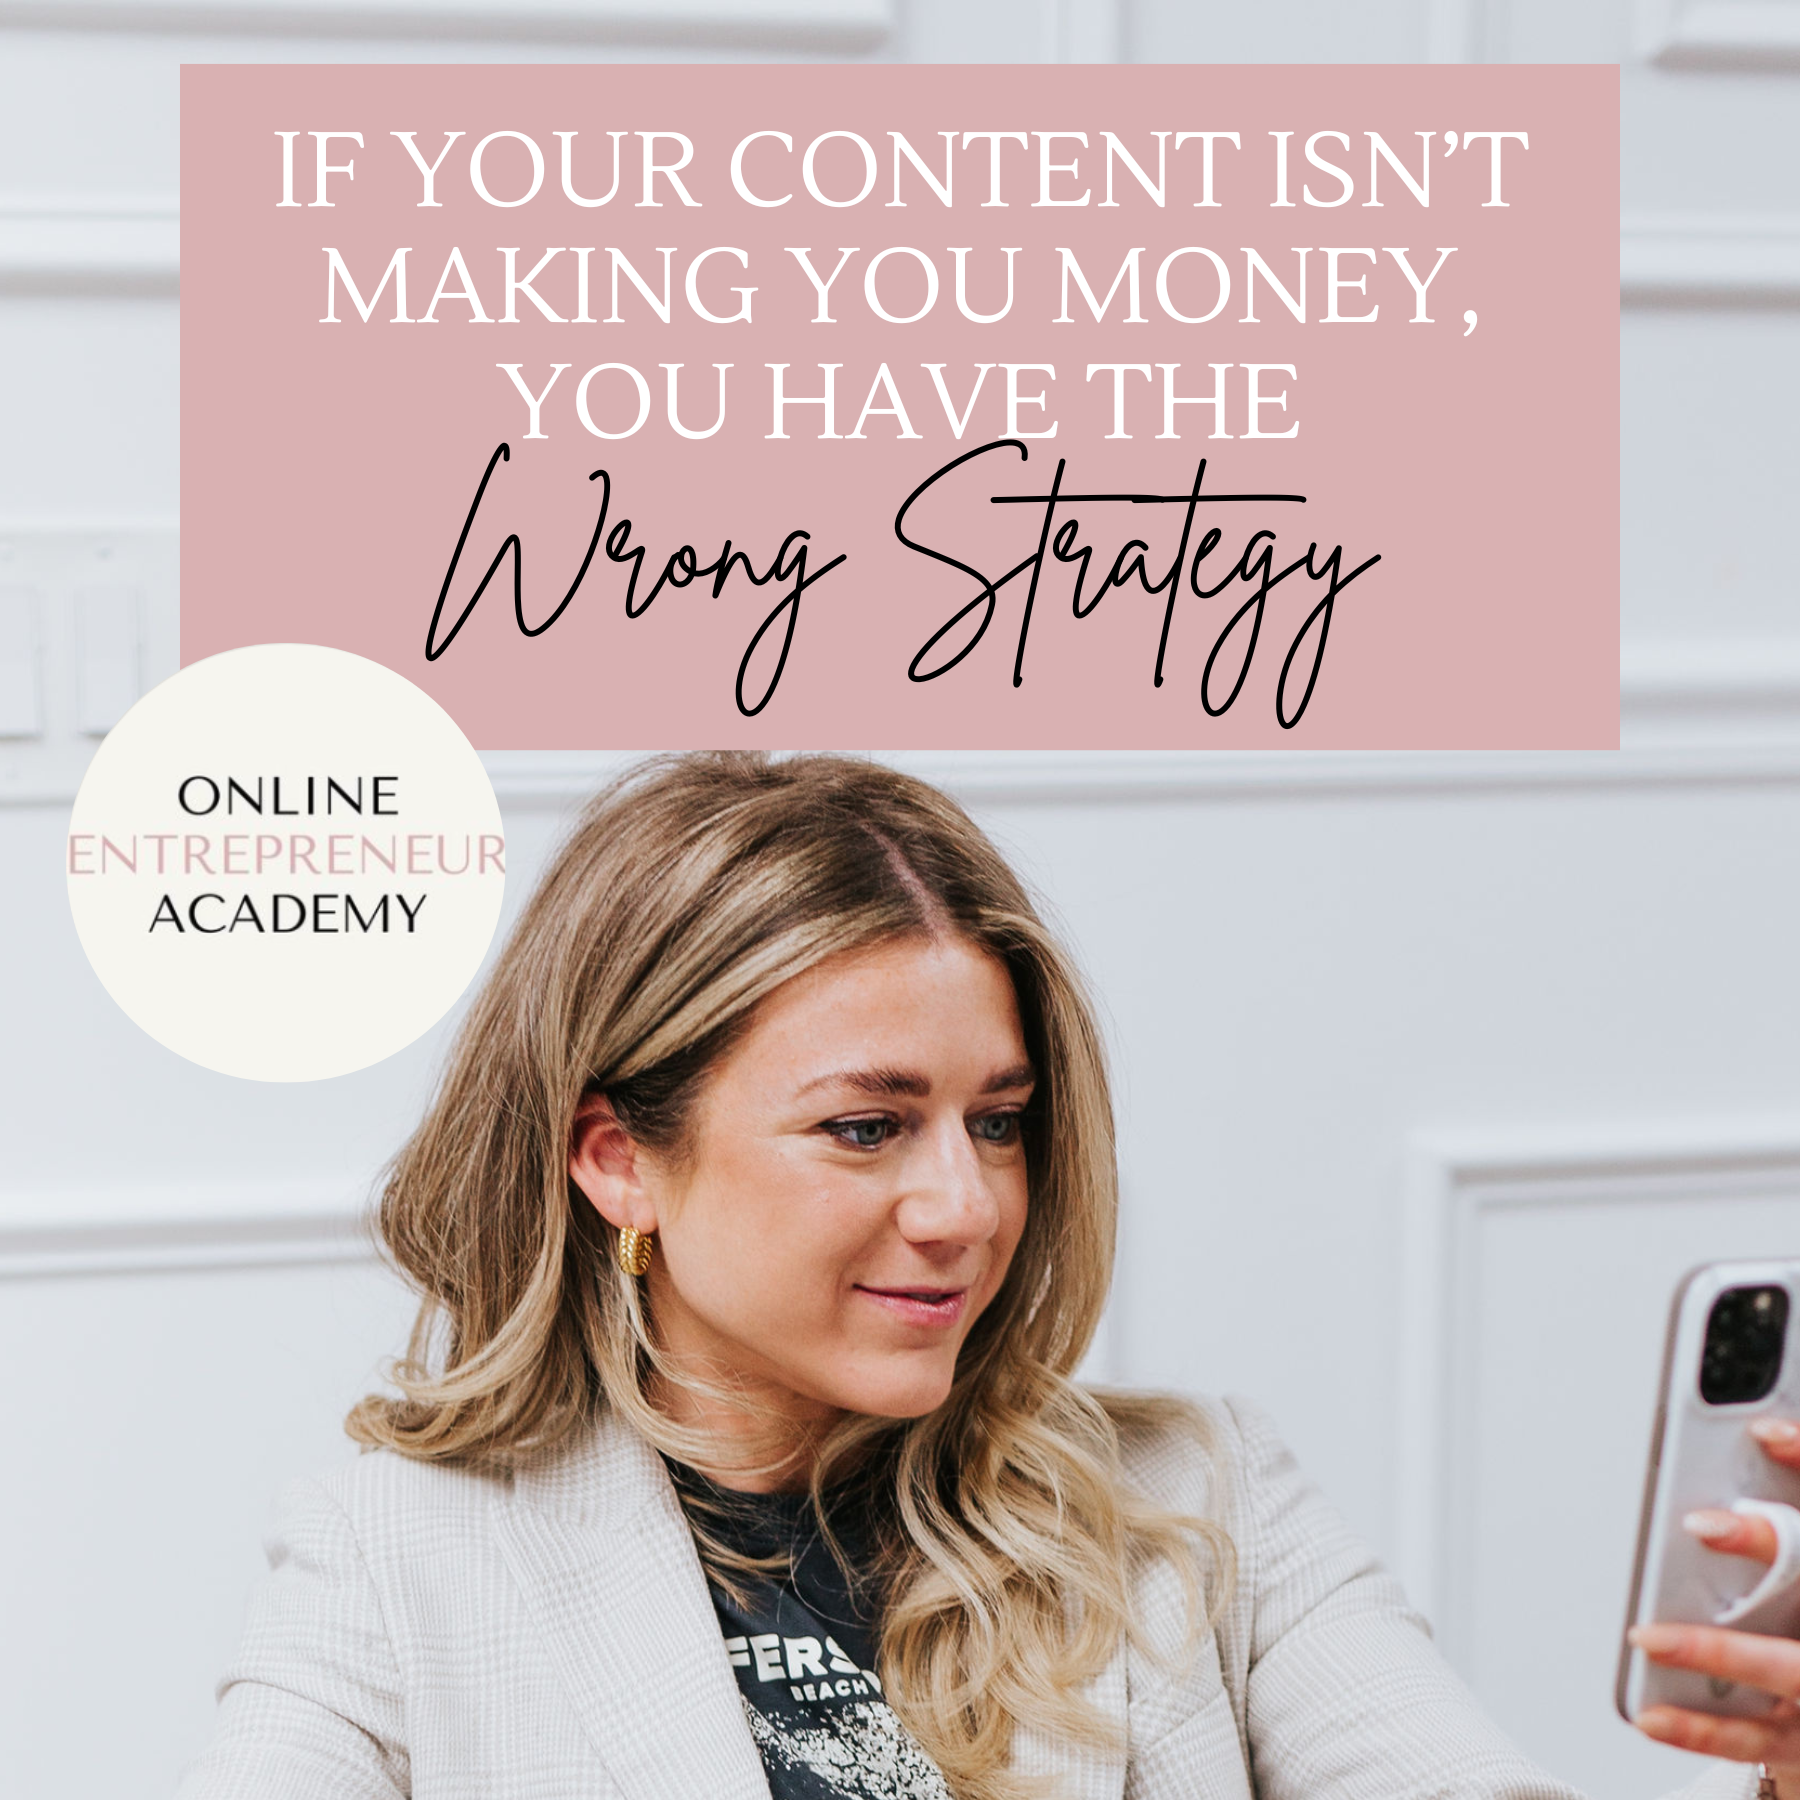 If Your Content Isn’t Making You Money, You Have The Wrong Strategy